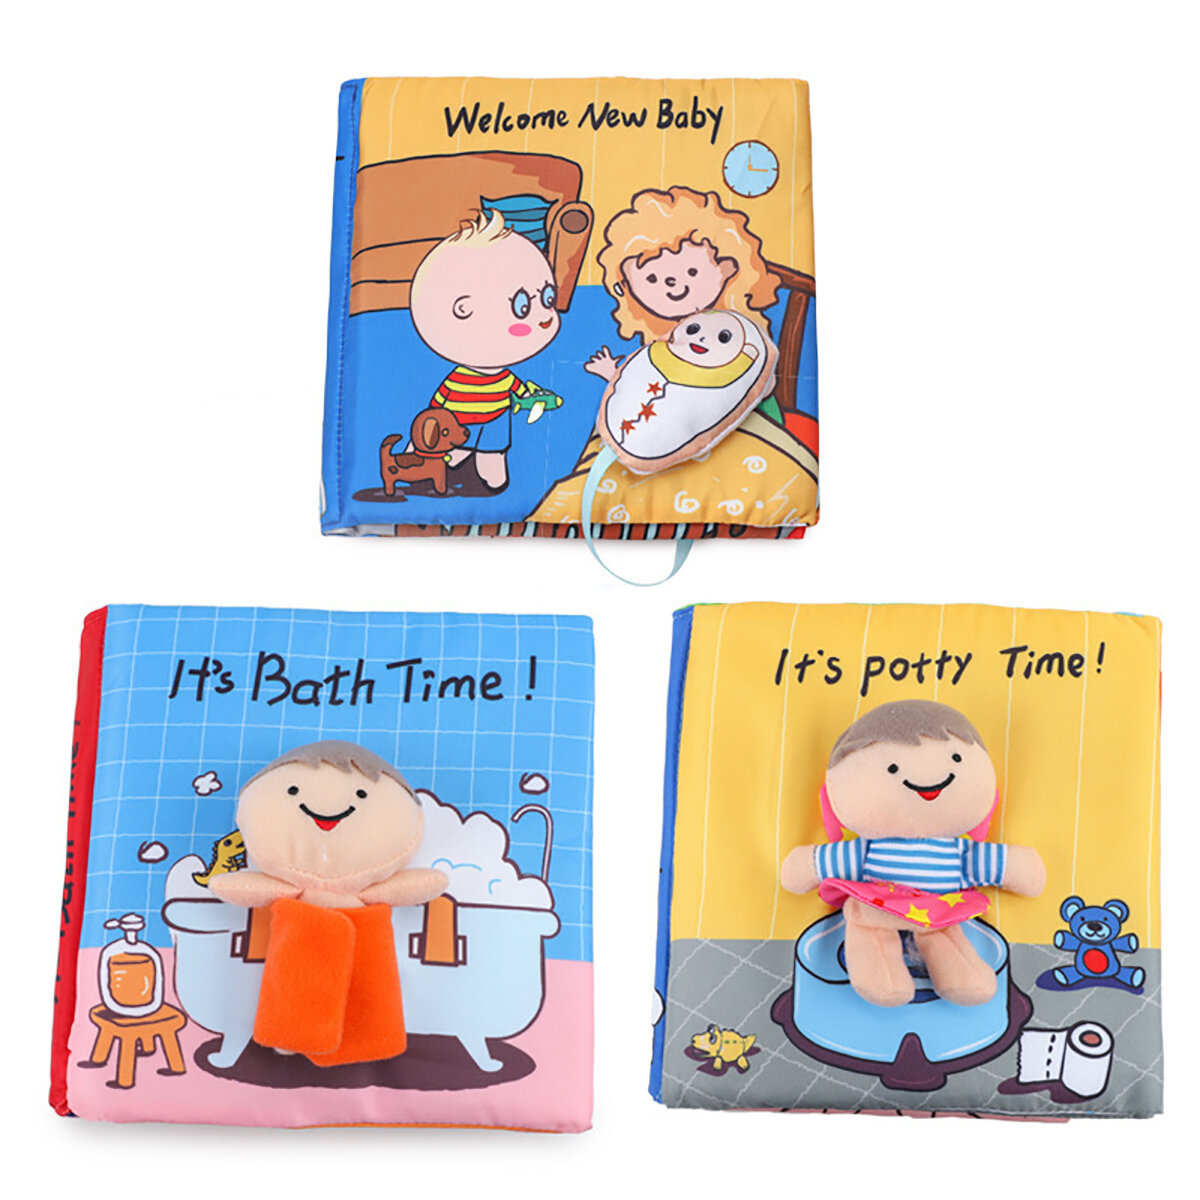 Tear-resistant Cloth Books for Baby Soft Nontoxic Fabric Early Children's Development Books Toys Gifts for Kids Toddlers Infants